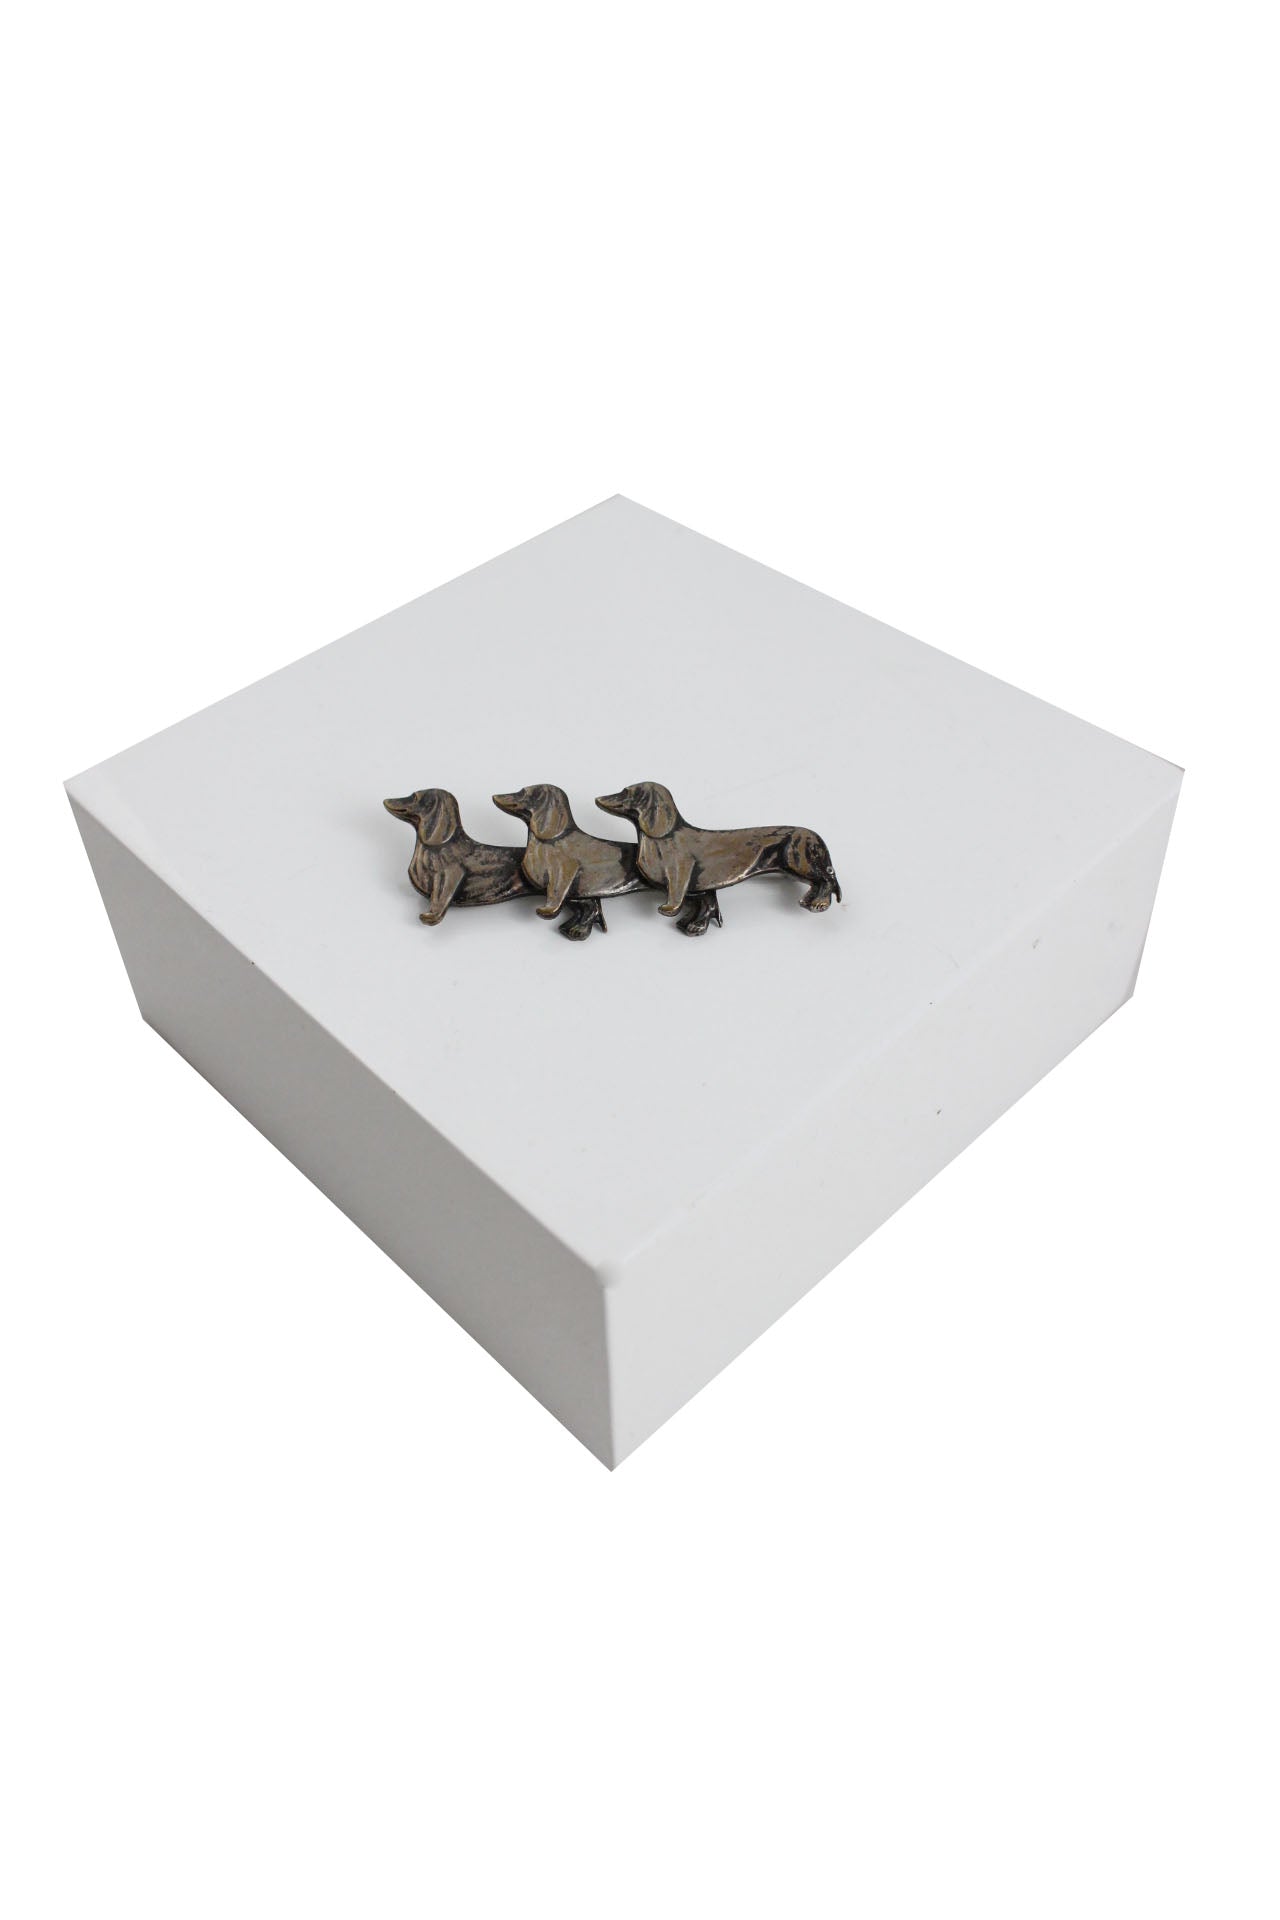 description: vintage three dog pin. features bronze-tone and turn closure. 